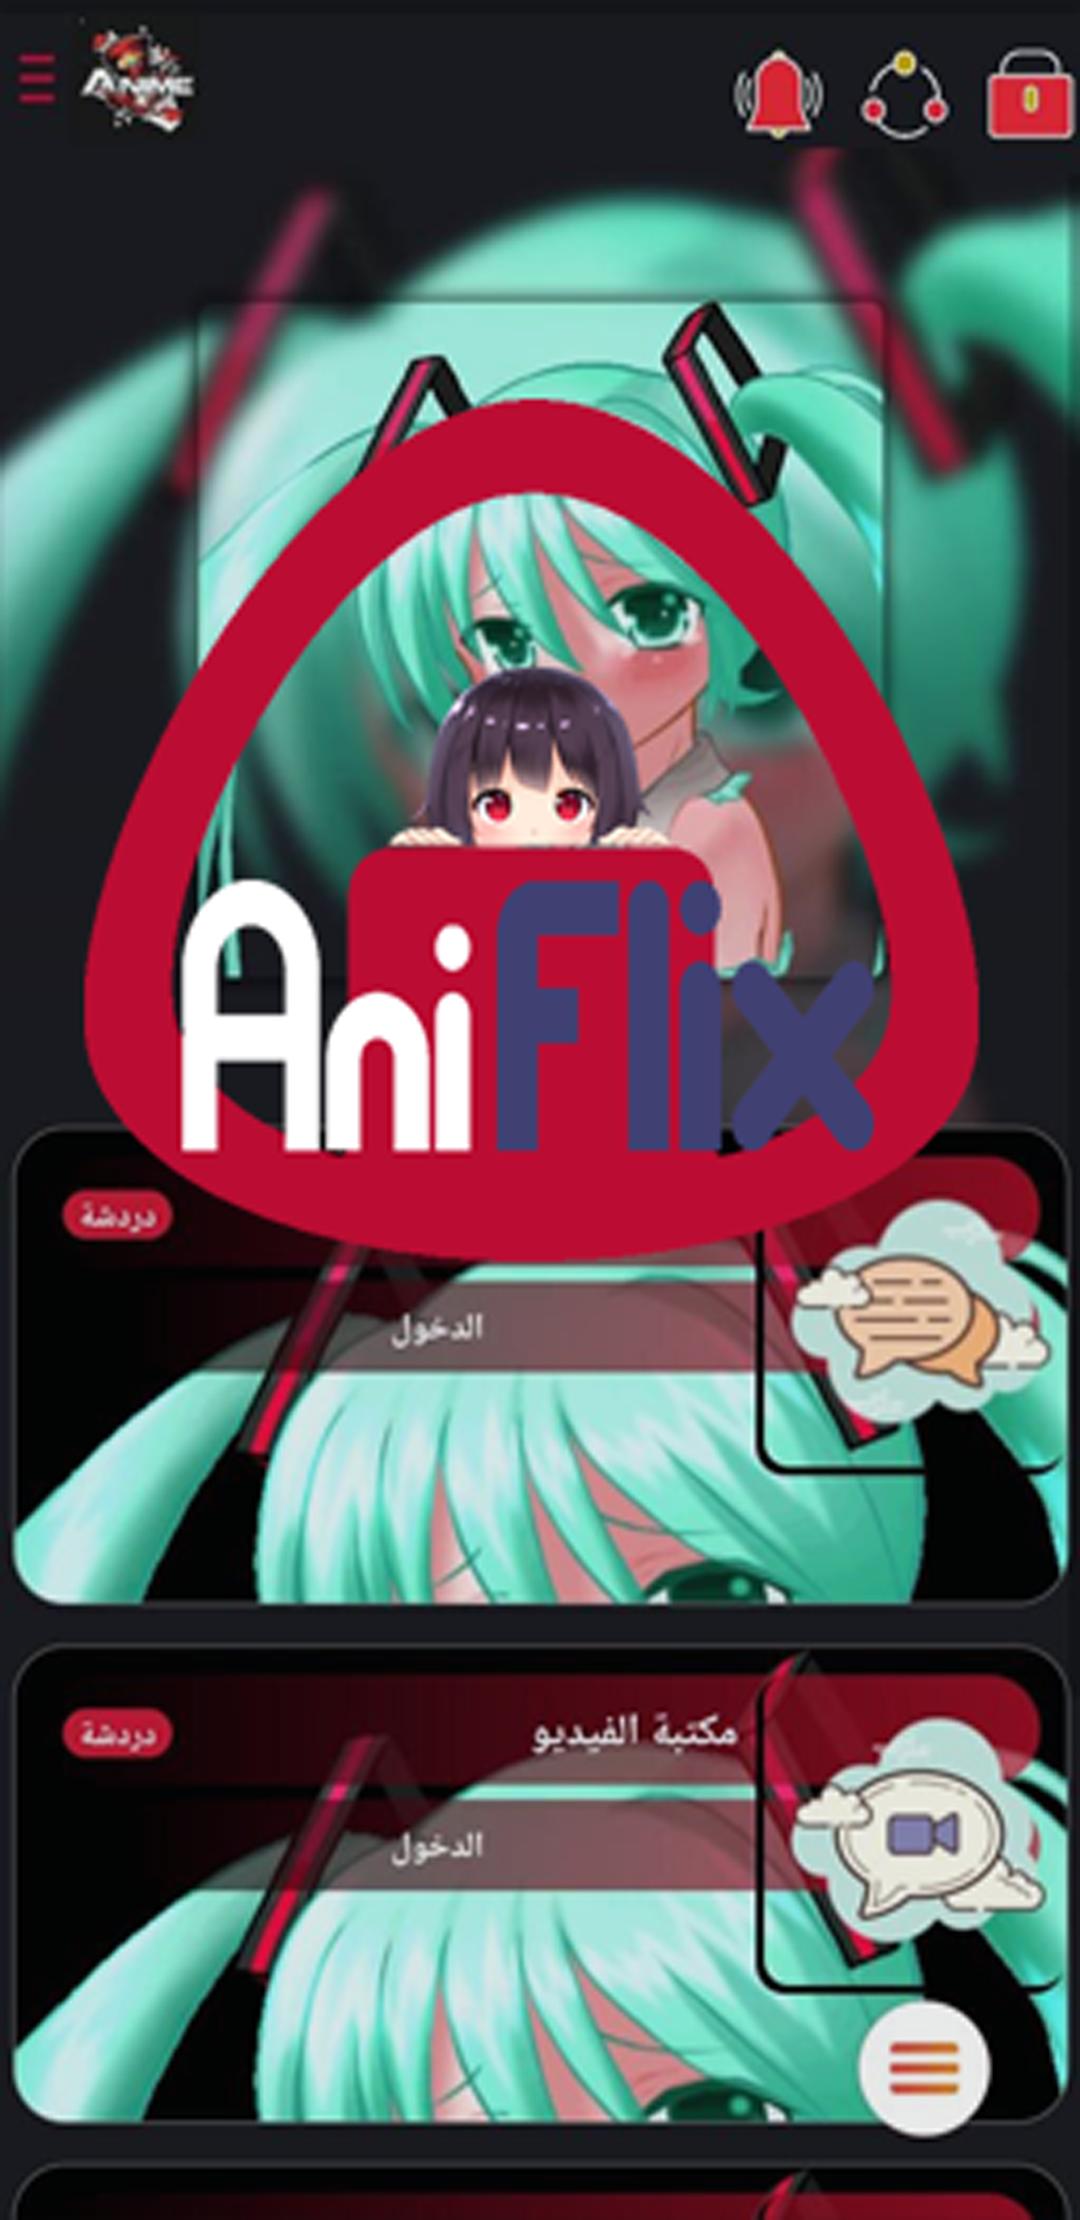 AniFlix - Animes e Desenhos On for Android - Free App Download